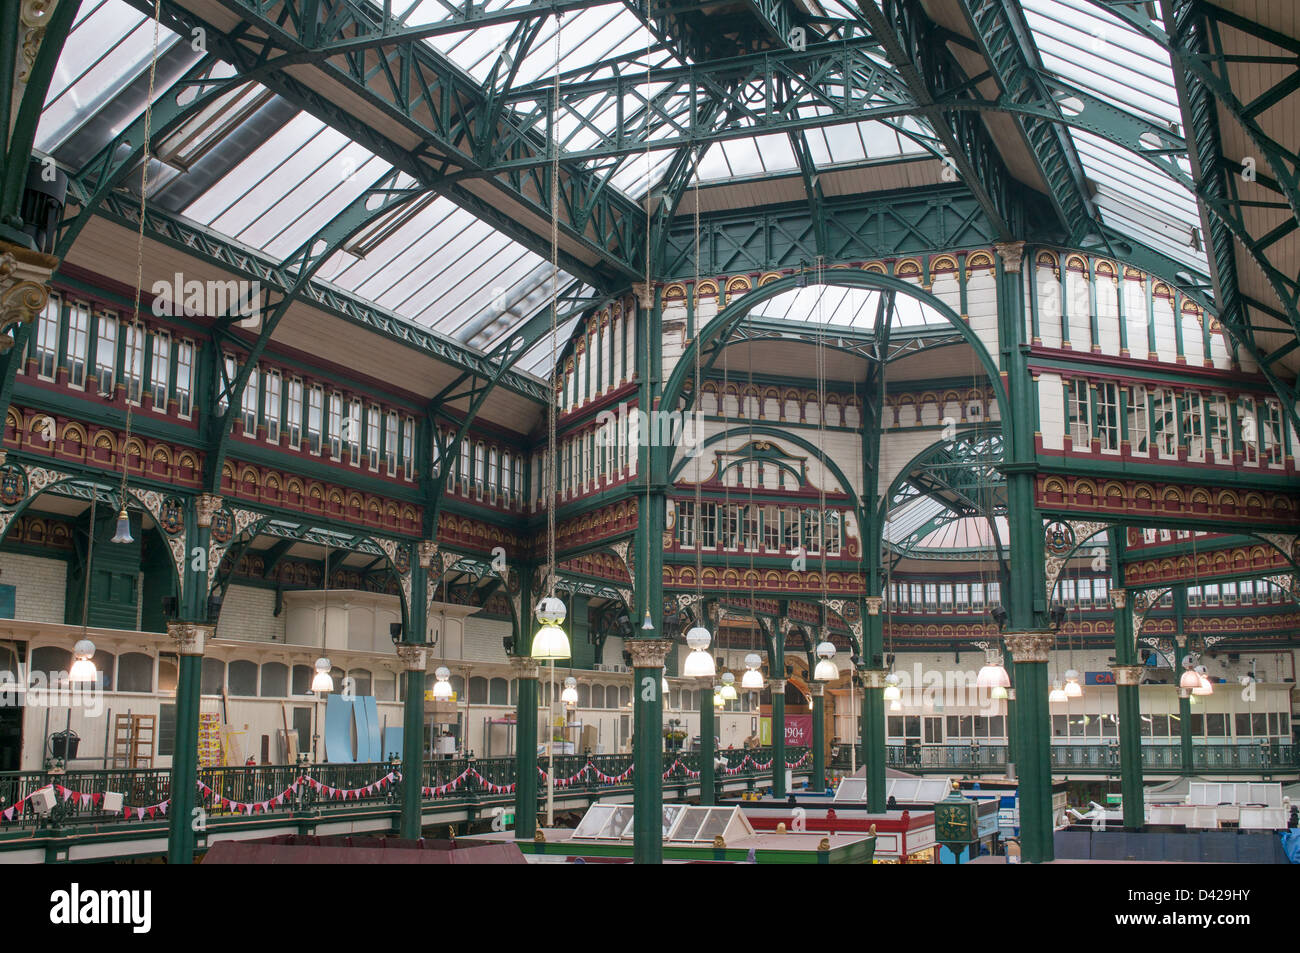 The decorative cast and wrought iron glazed roof structure within ...